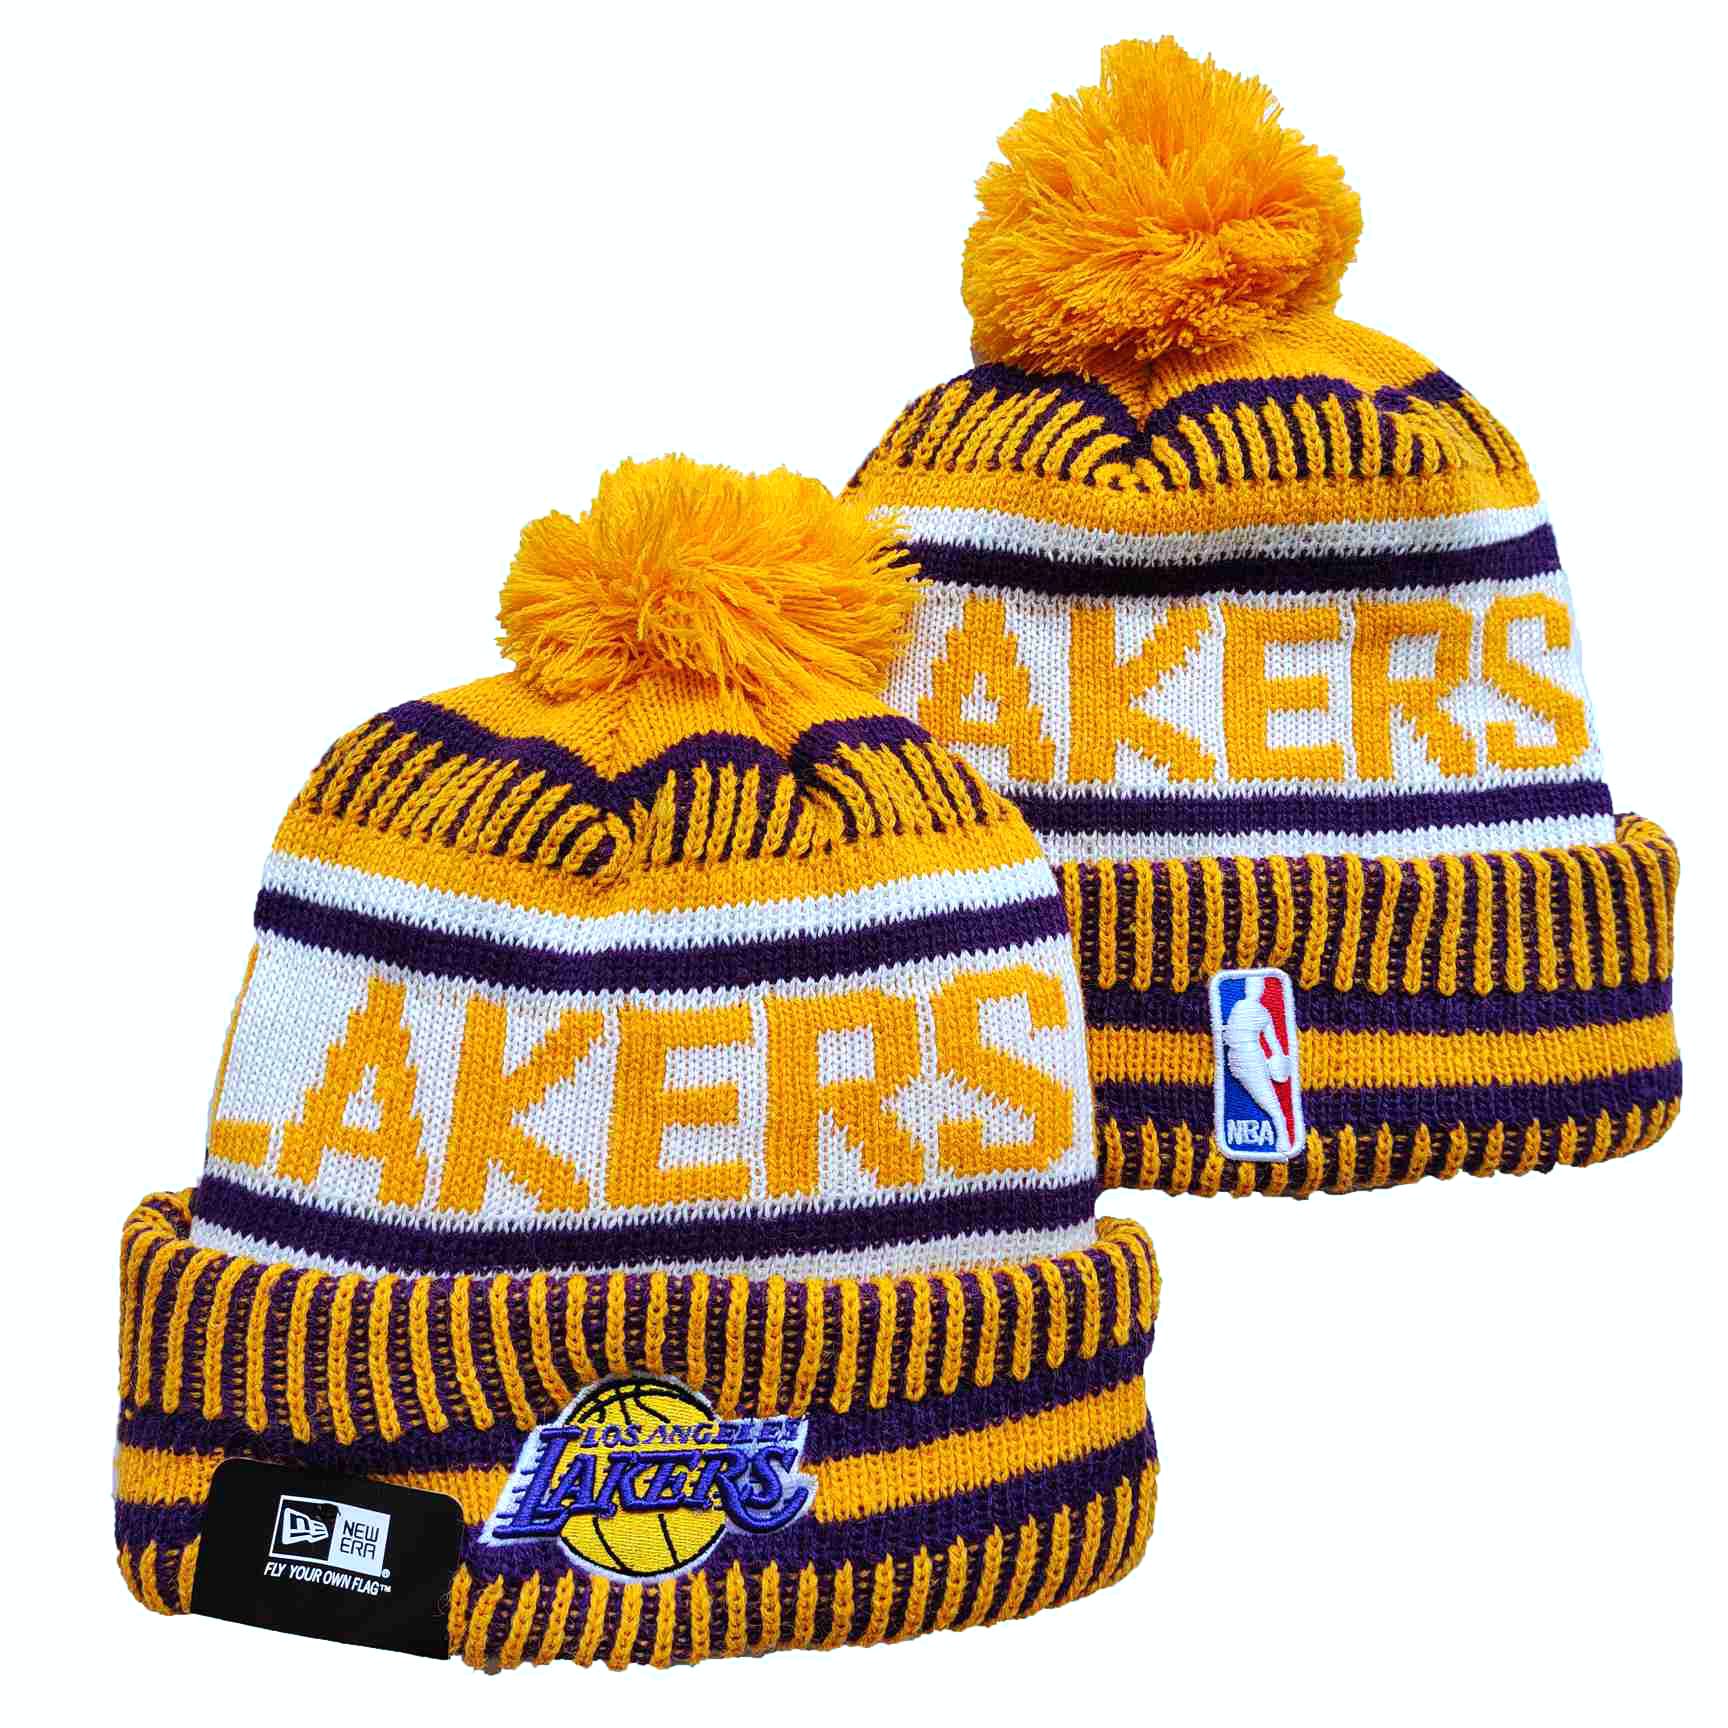 NBA Los Angeles Lakers Beanies Knit Hats-YD494